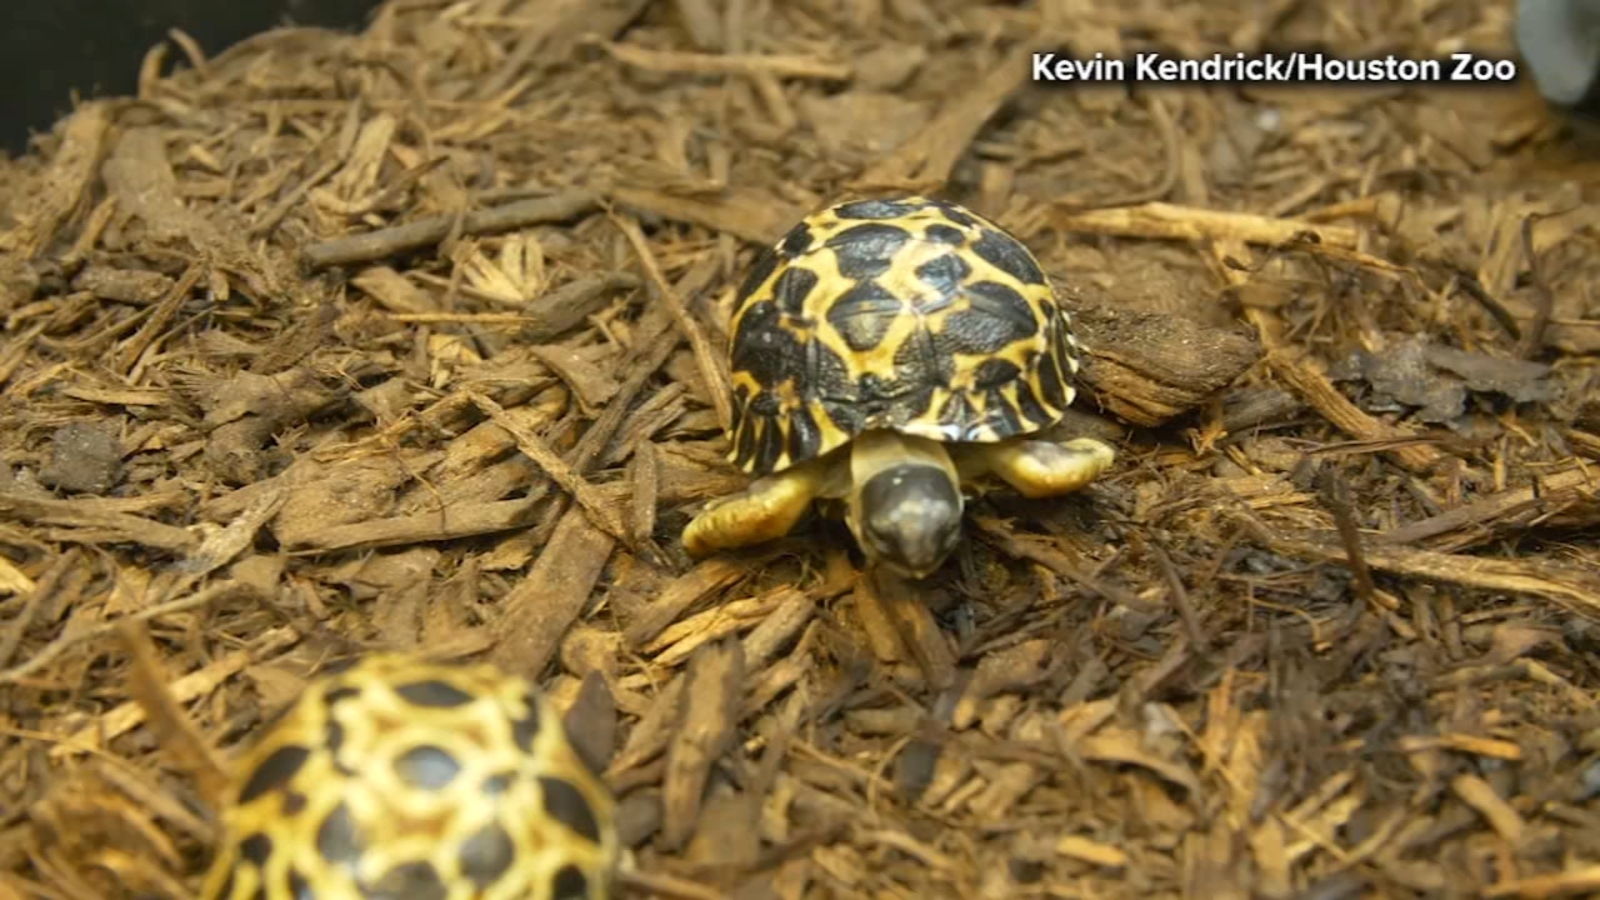 Houston Zoo welcomes rare baby tortoise trio of Dill, Gherkin, and Jalapeño